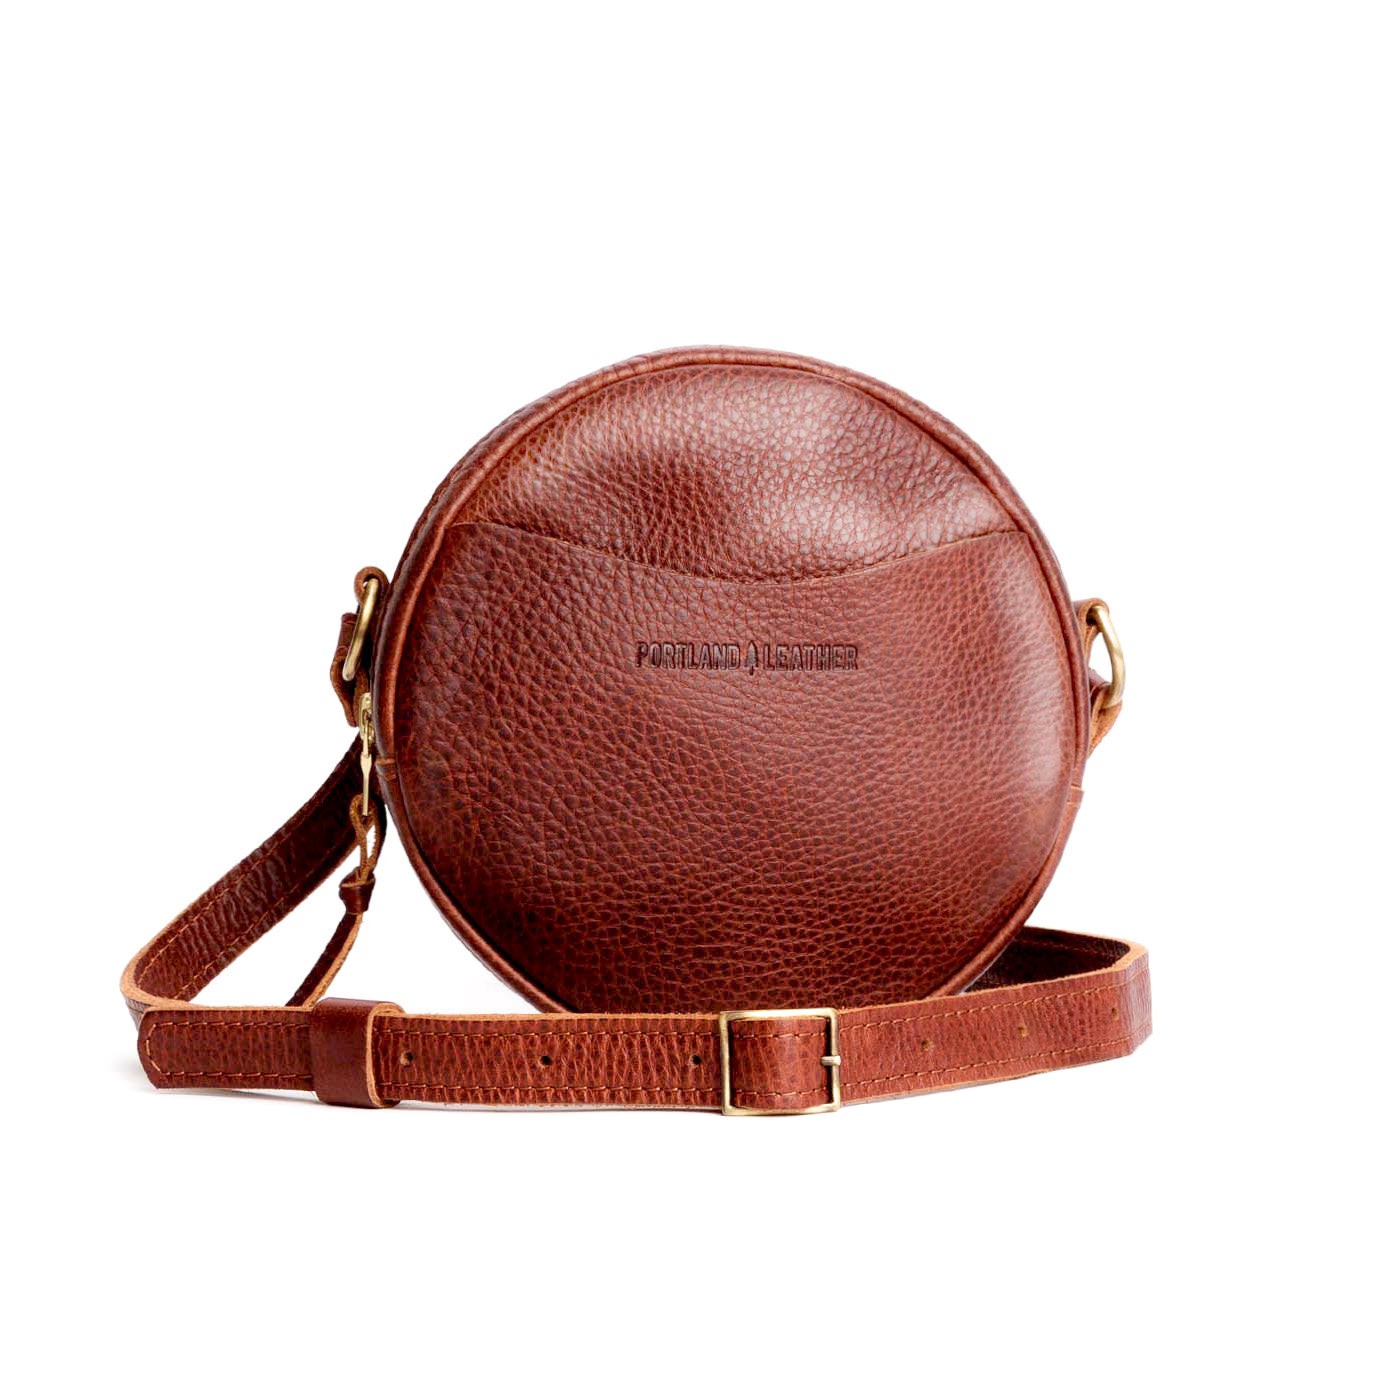 DailyObjects Orbis Round Sling Crossbody Bag For Women| Stylish Solid Tan  Vegan Leather Purse With Slip Pocket & 2 Compartments Inside| Zip Closure &  Adjustable Strap| Storage Space For Essentials : Amazon.in: